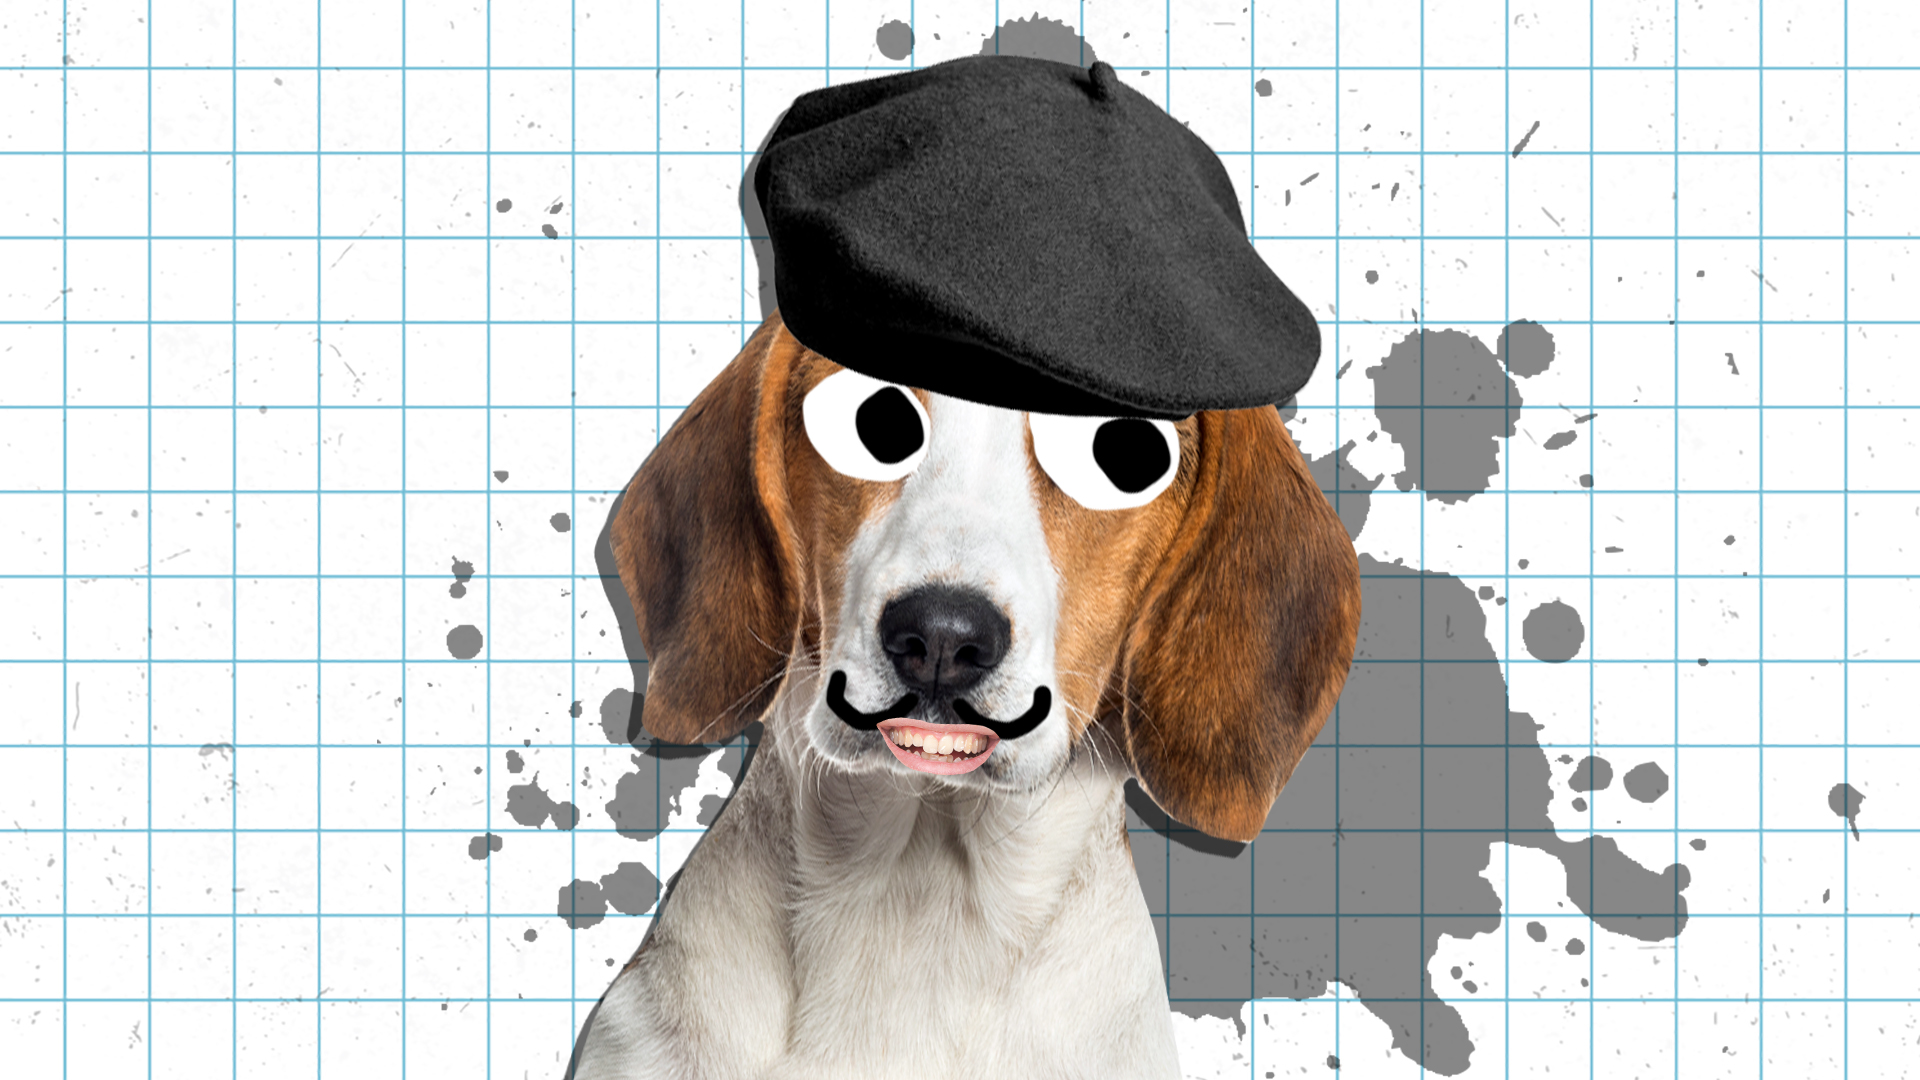 An artistic dog in a beret